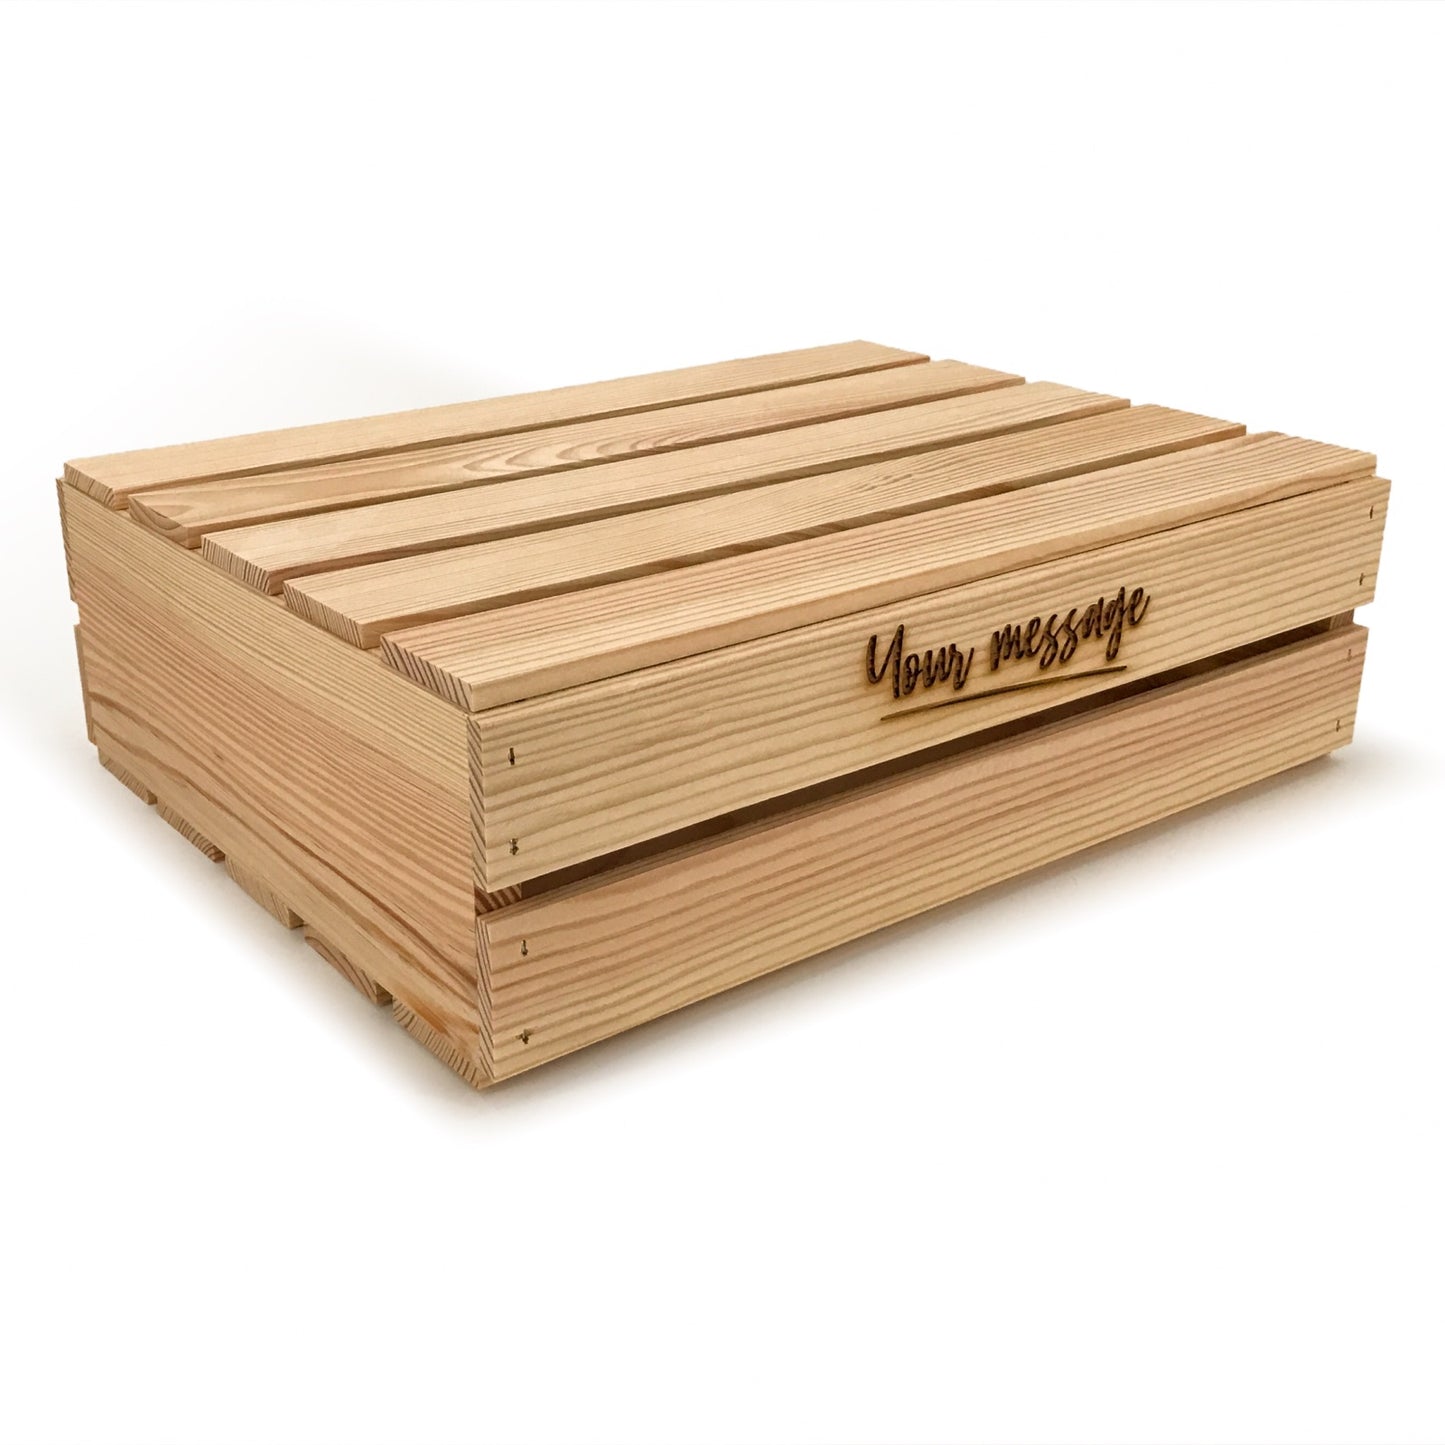 Small wooden crate with lid and custom message 18x14x5.25, 6-WS-18-14-5.25-ST-NW-LL, 12-WS-18-14-5.25-ST-NW-LL, 24-WS-18-14-5.25-ST-NW-LL, 48-WS-18-14-5.25-ST-NW-LL, 96-WS-18-14-5.25-ST-NW-LL